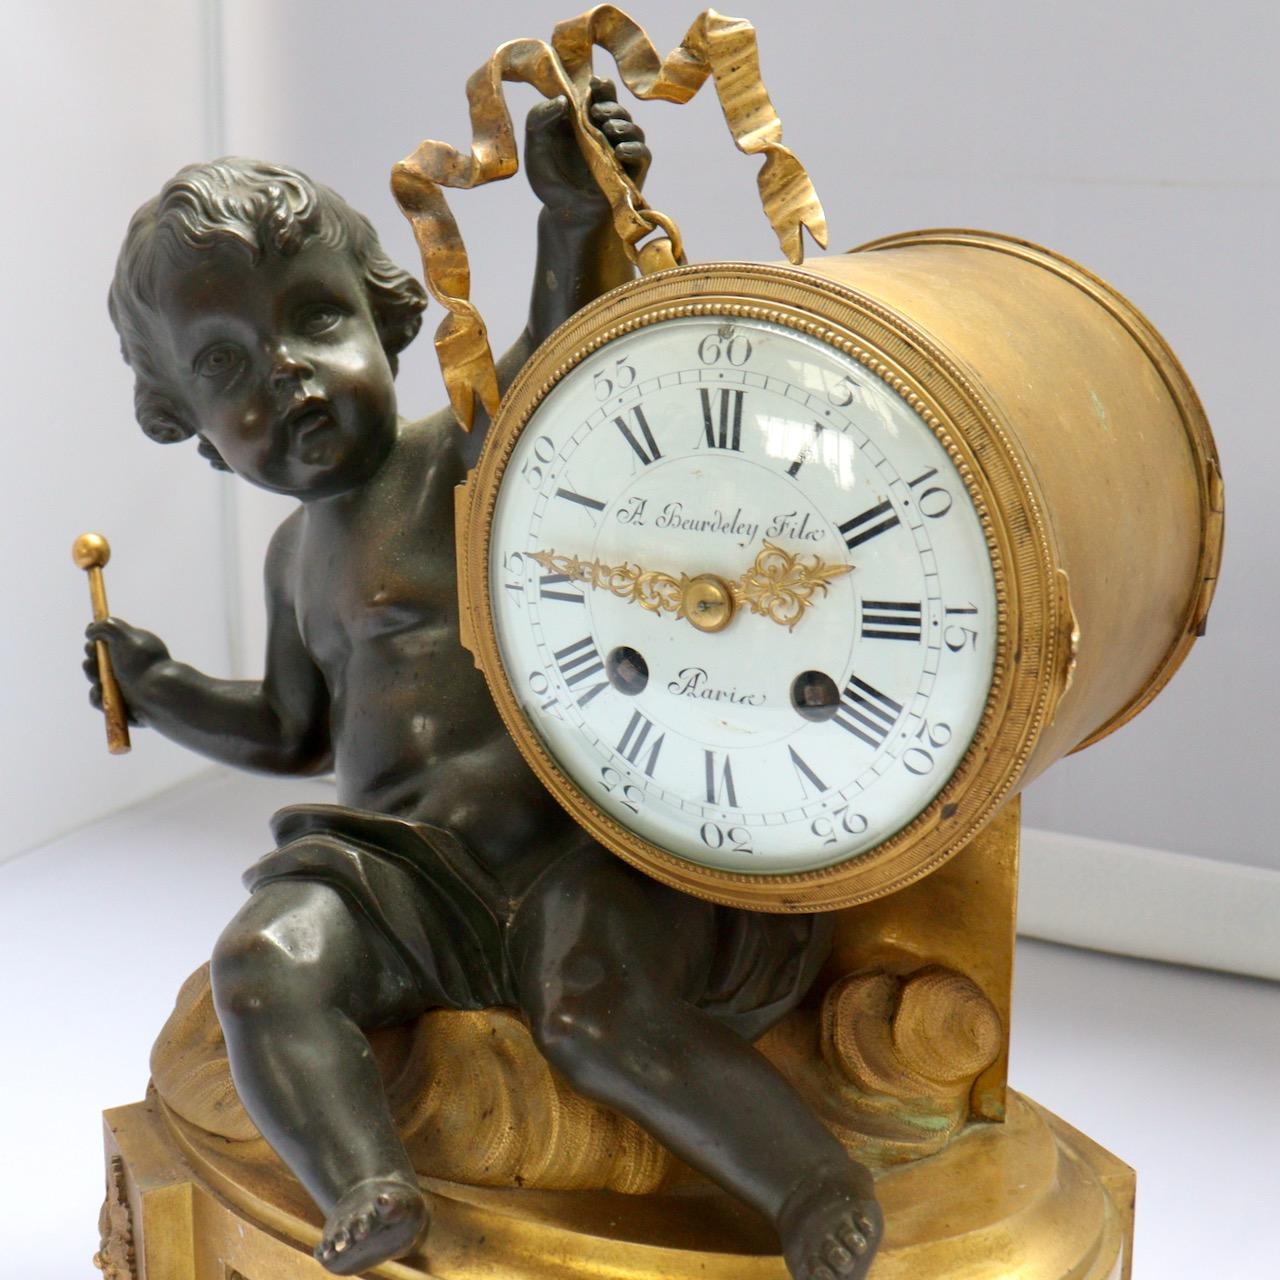 French 19th Century Mantel Clock by a.Beurdeley Fils 1